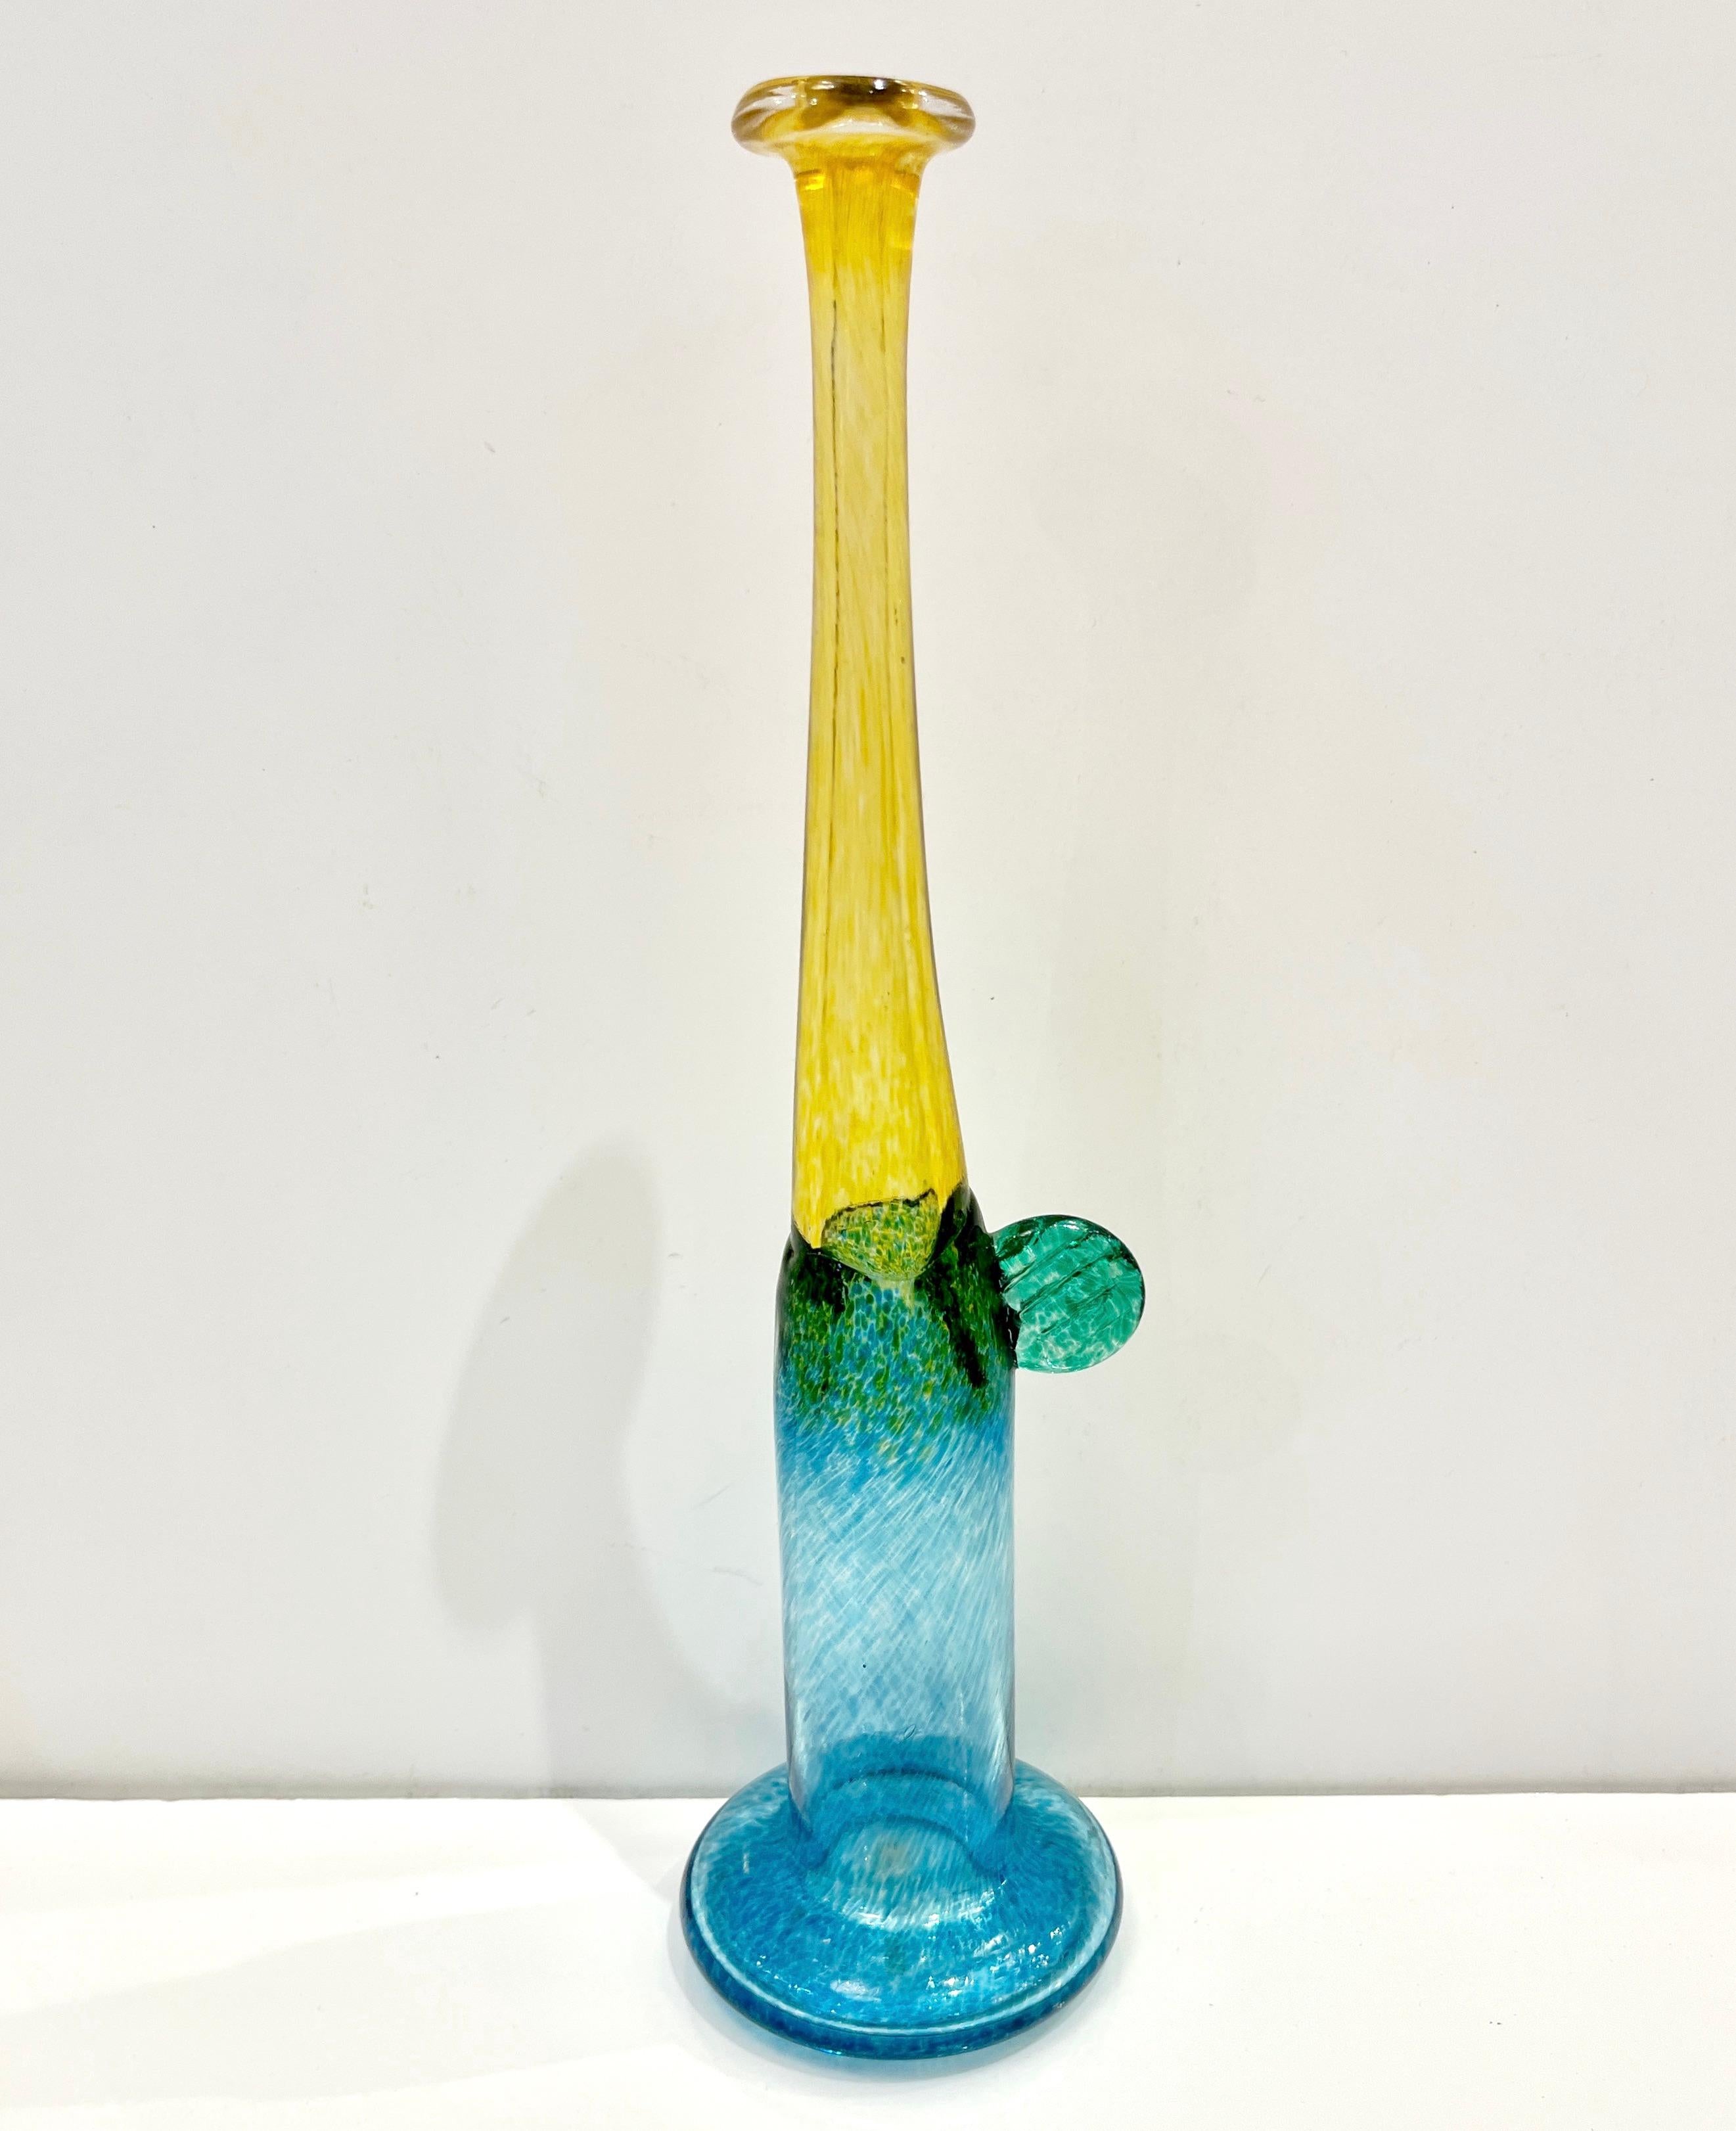 A fun and colored single-flower modern vase by Swedish glass master Bertil Vallien for Kosta Boda, limited Edition n.48on 75. Etched with the artist's signature and details under the base. This vase (that can be accompanied by a taller item